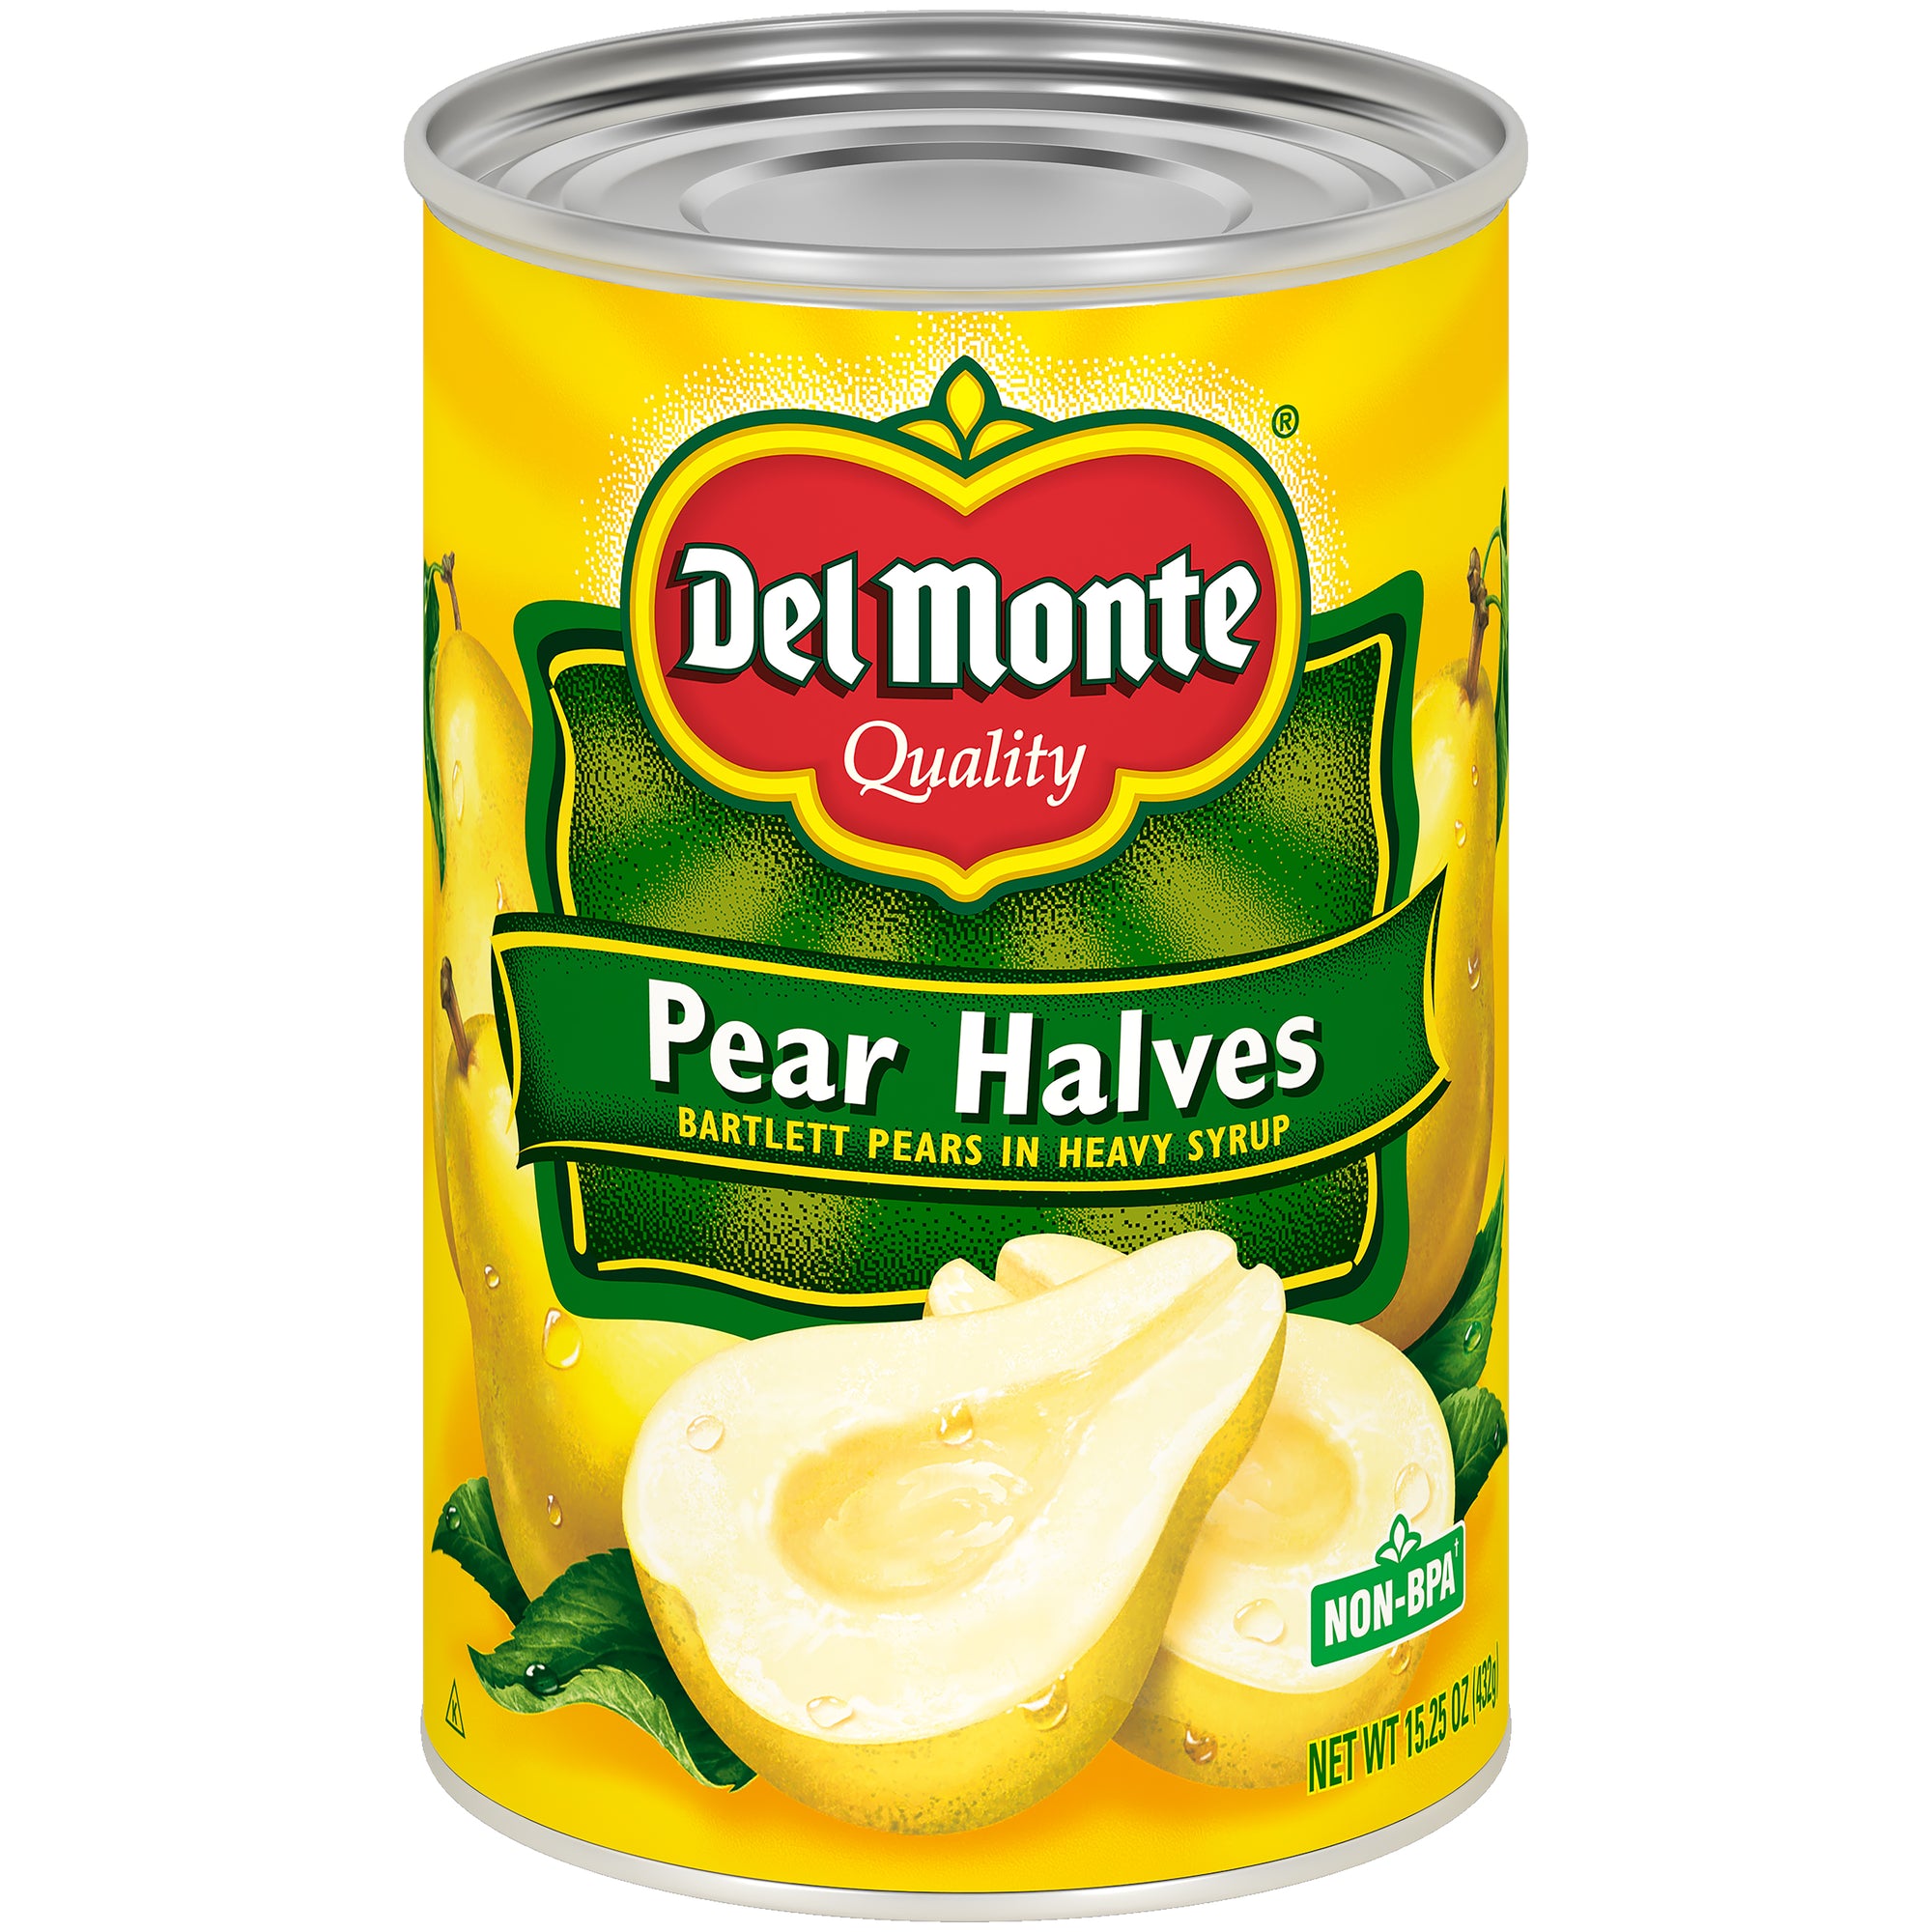 Del Monte(R) Bartlett Pear Halves in Heavy Syrup 12/15.25 oz. Can